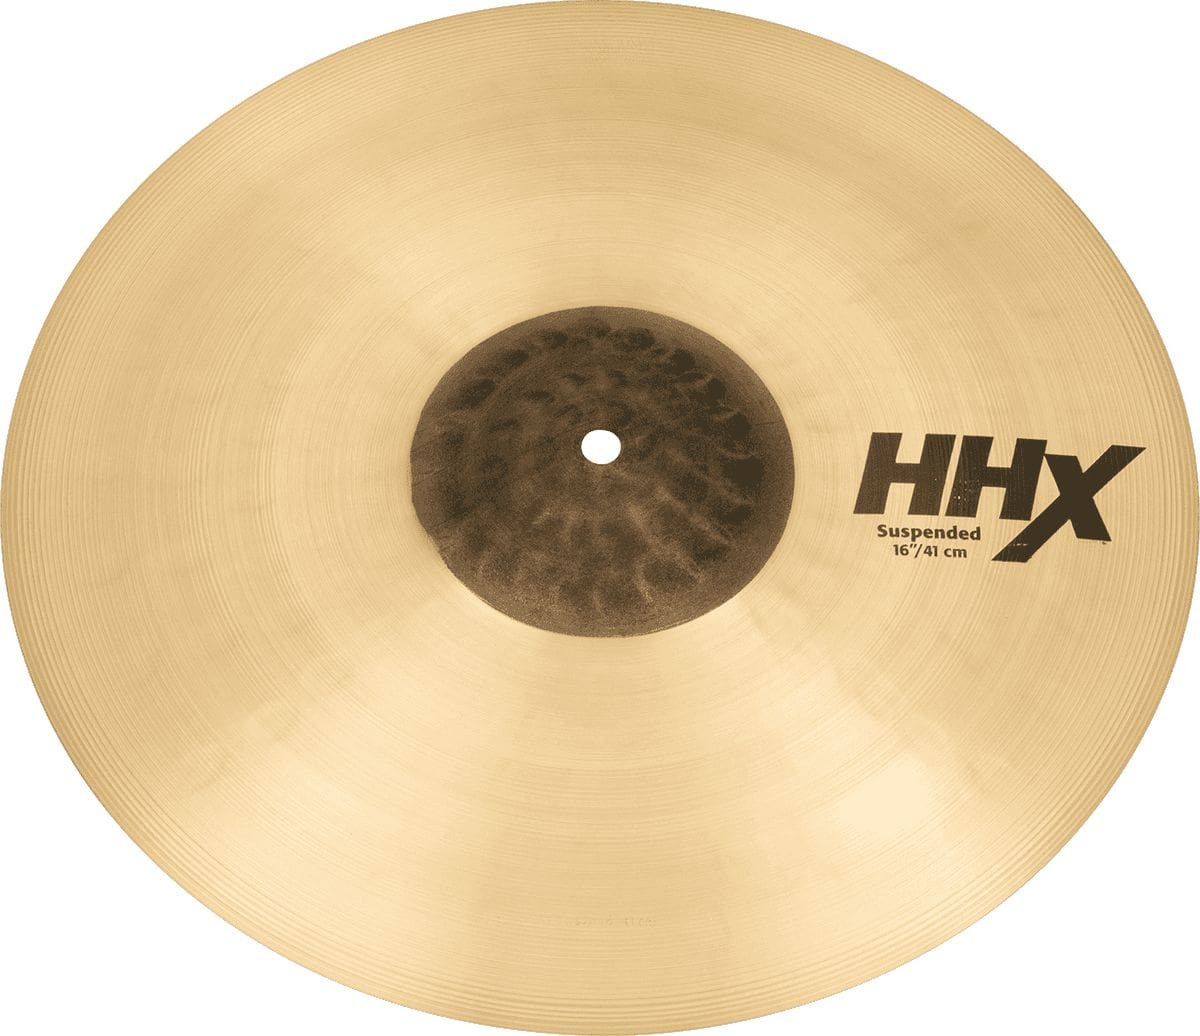 SABIAN HHX SUSPENDED 16